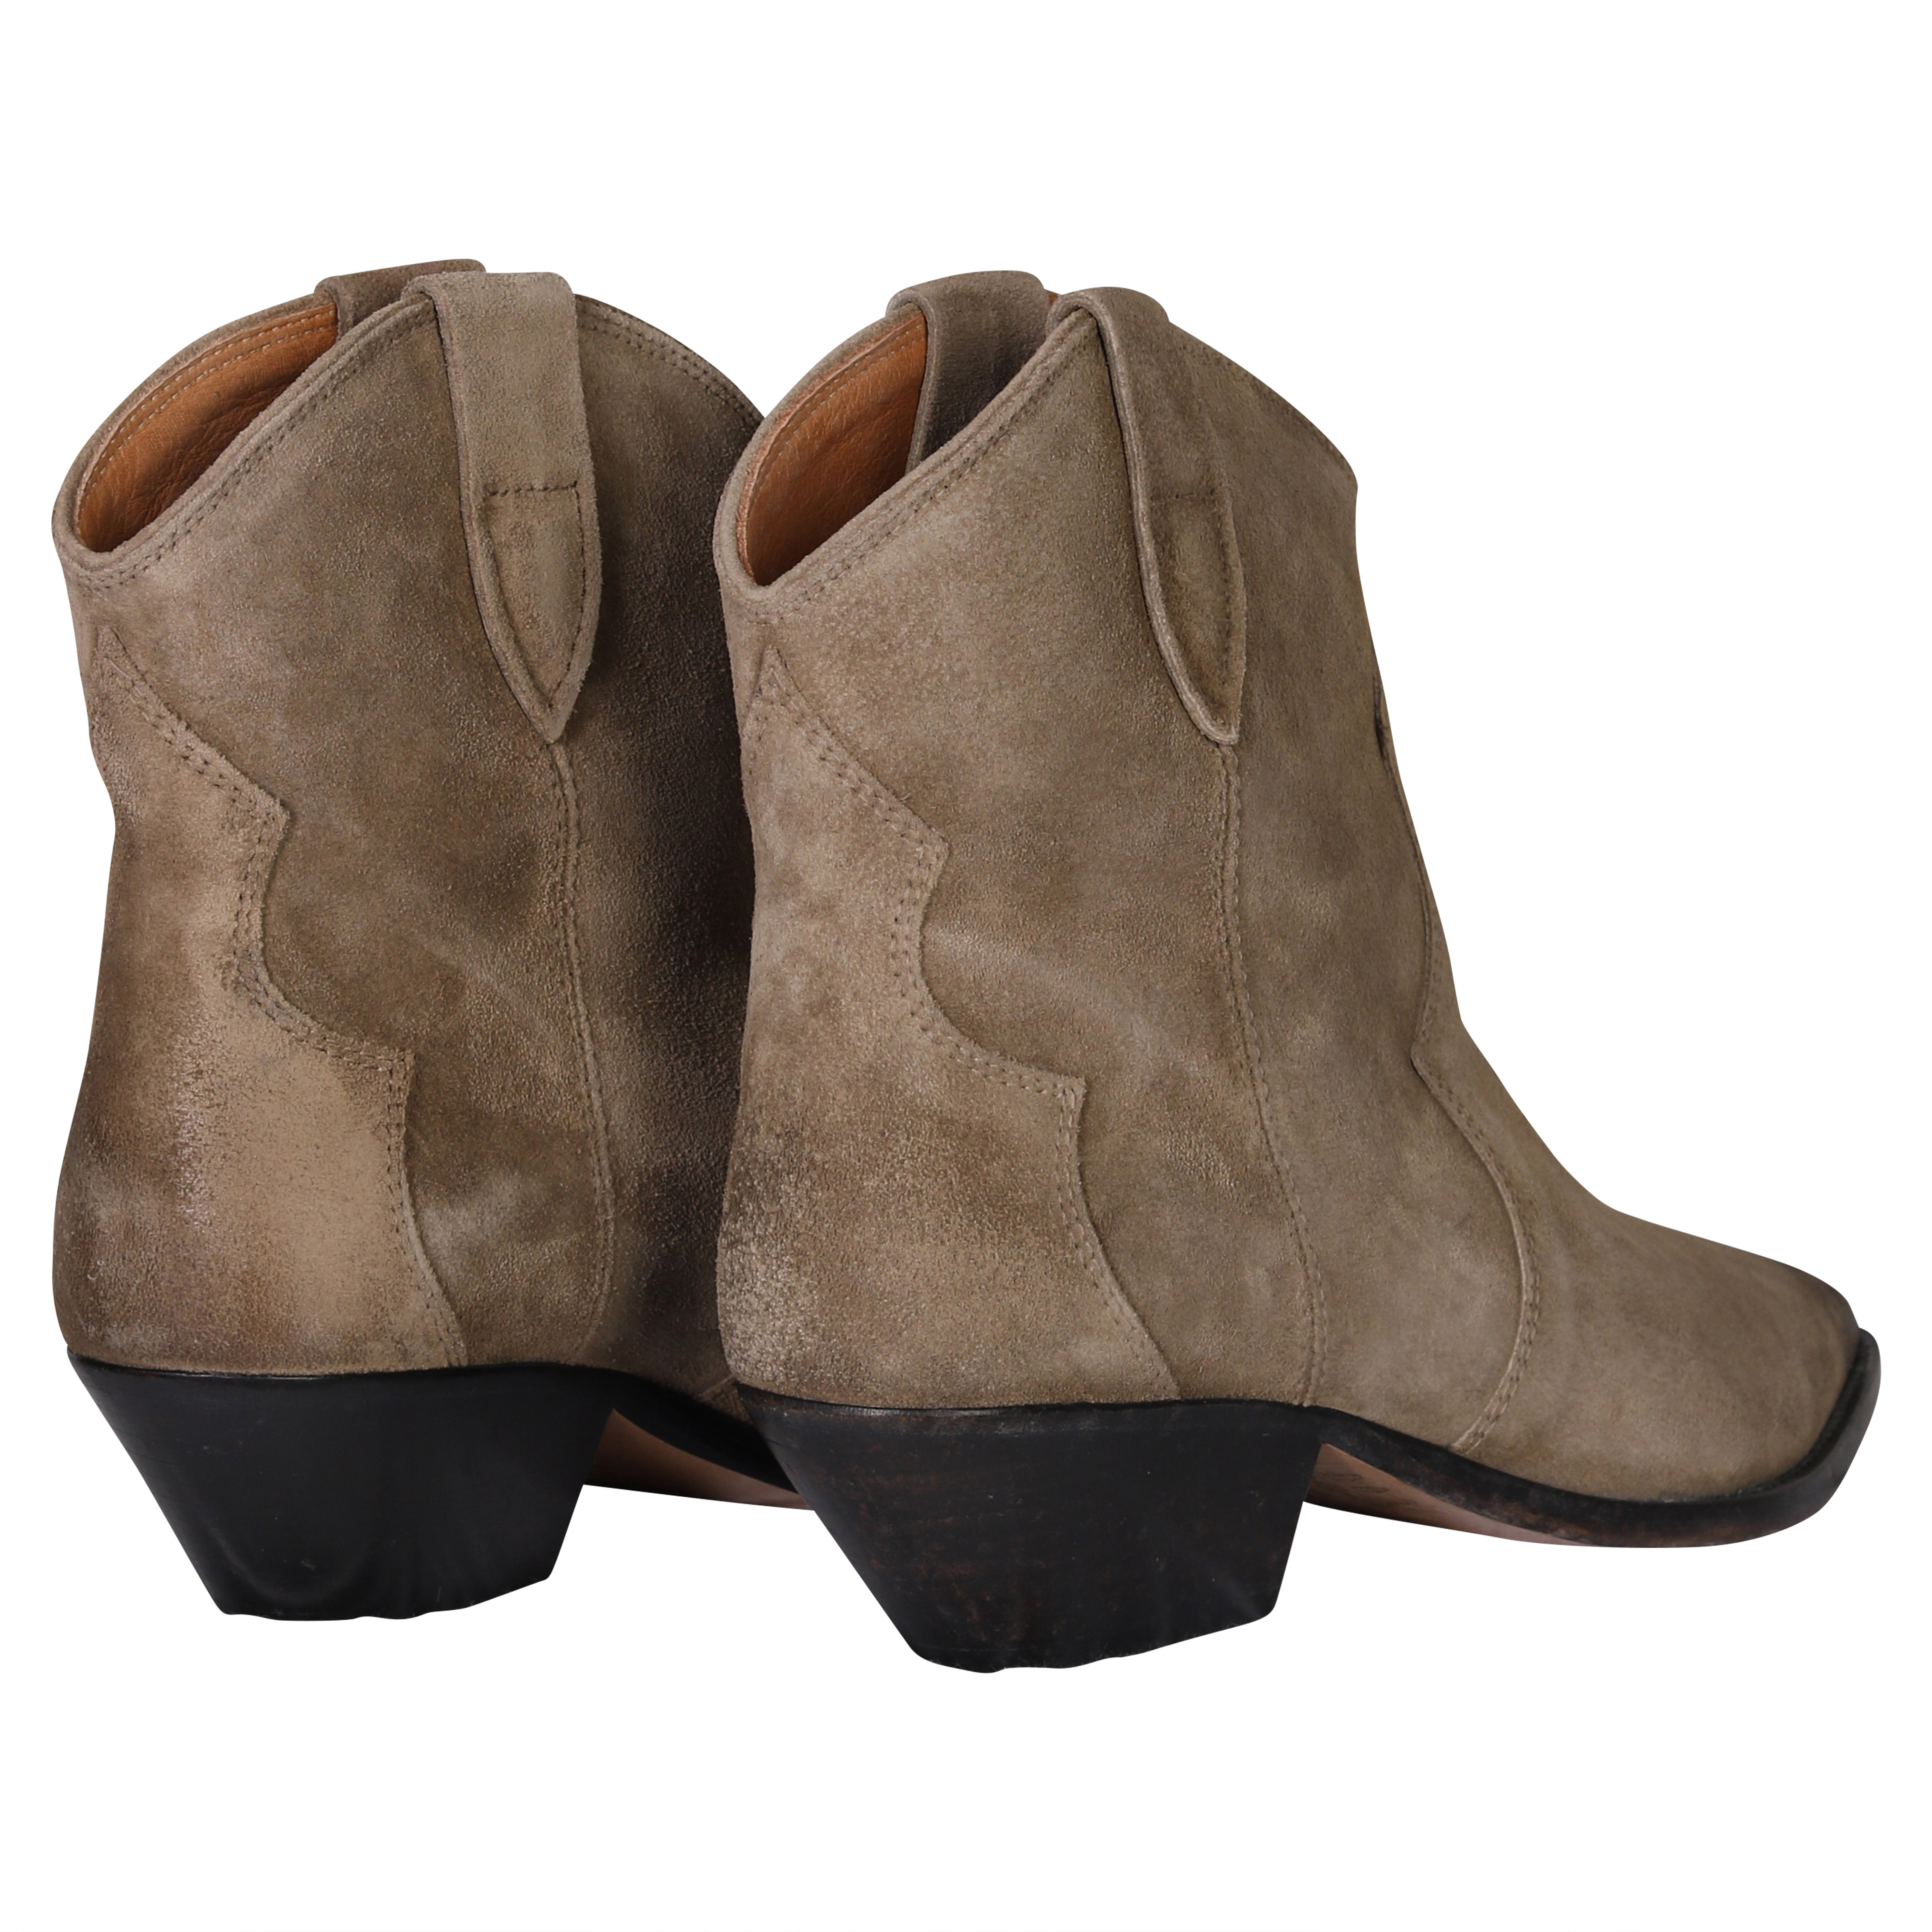 Isabel Marant Dewina Boots in Taupe 38